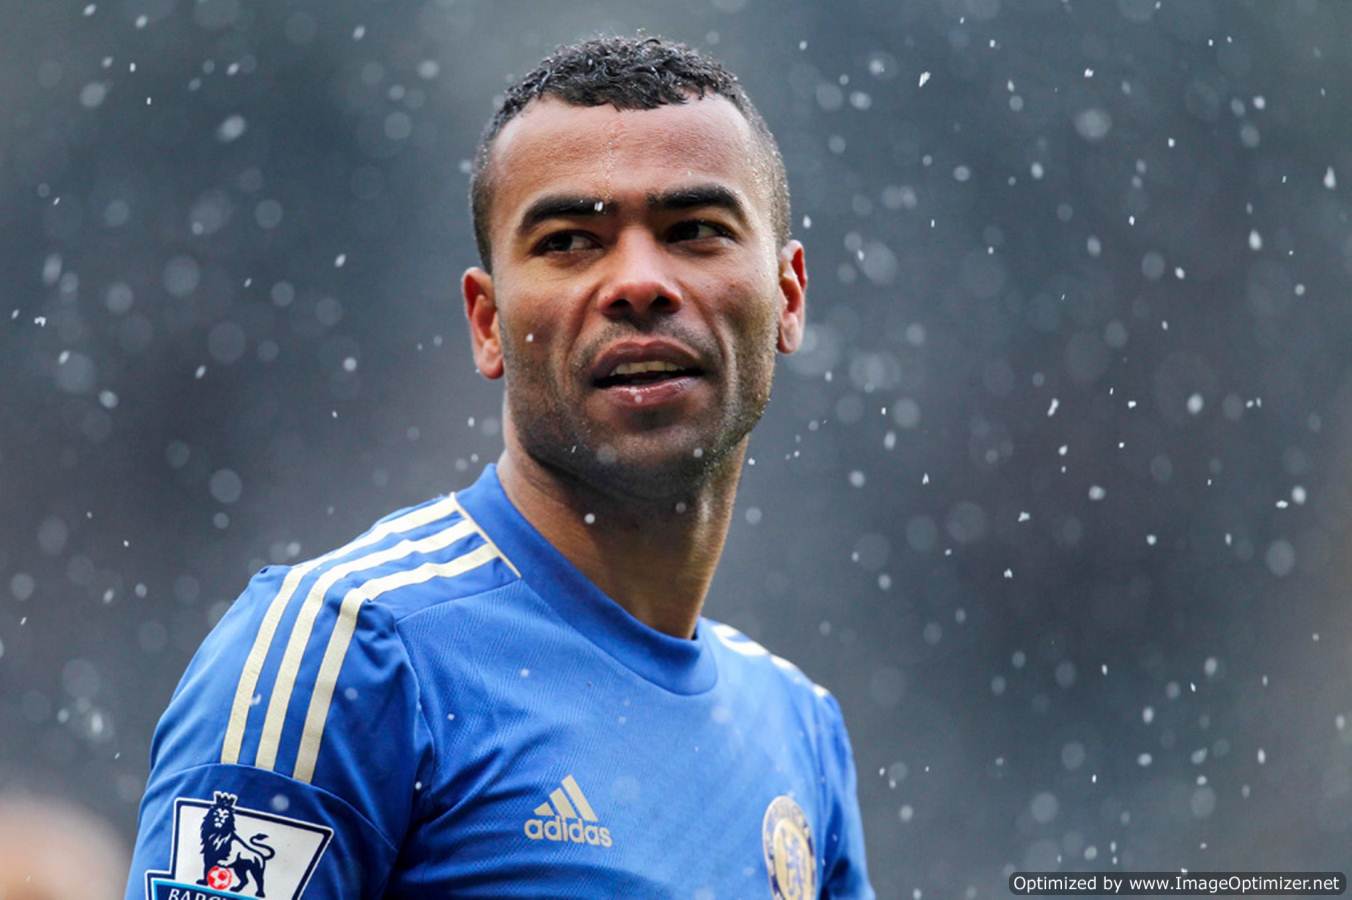 Ashley Cole Soccer Player Biography and Pictures | Sports Club Blog